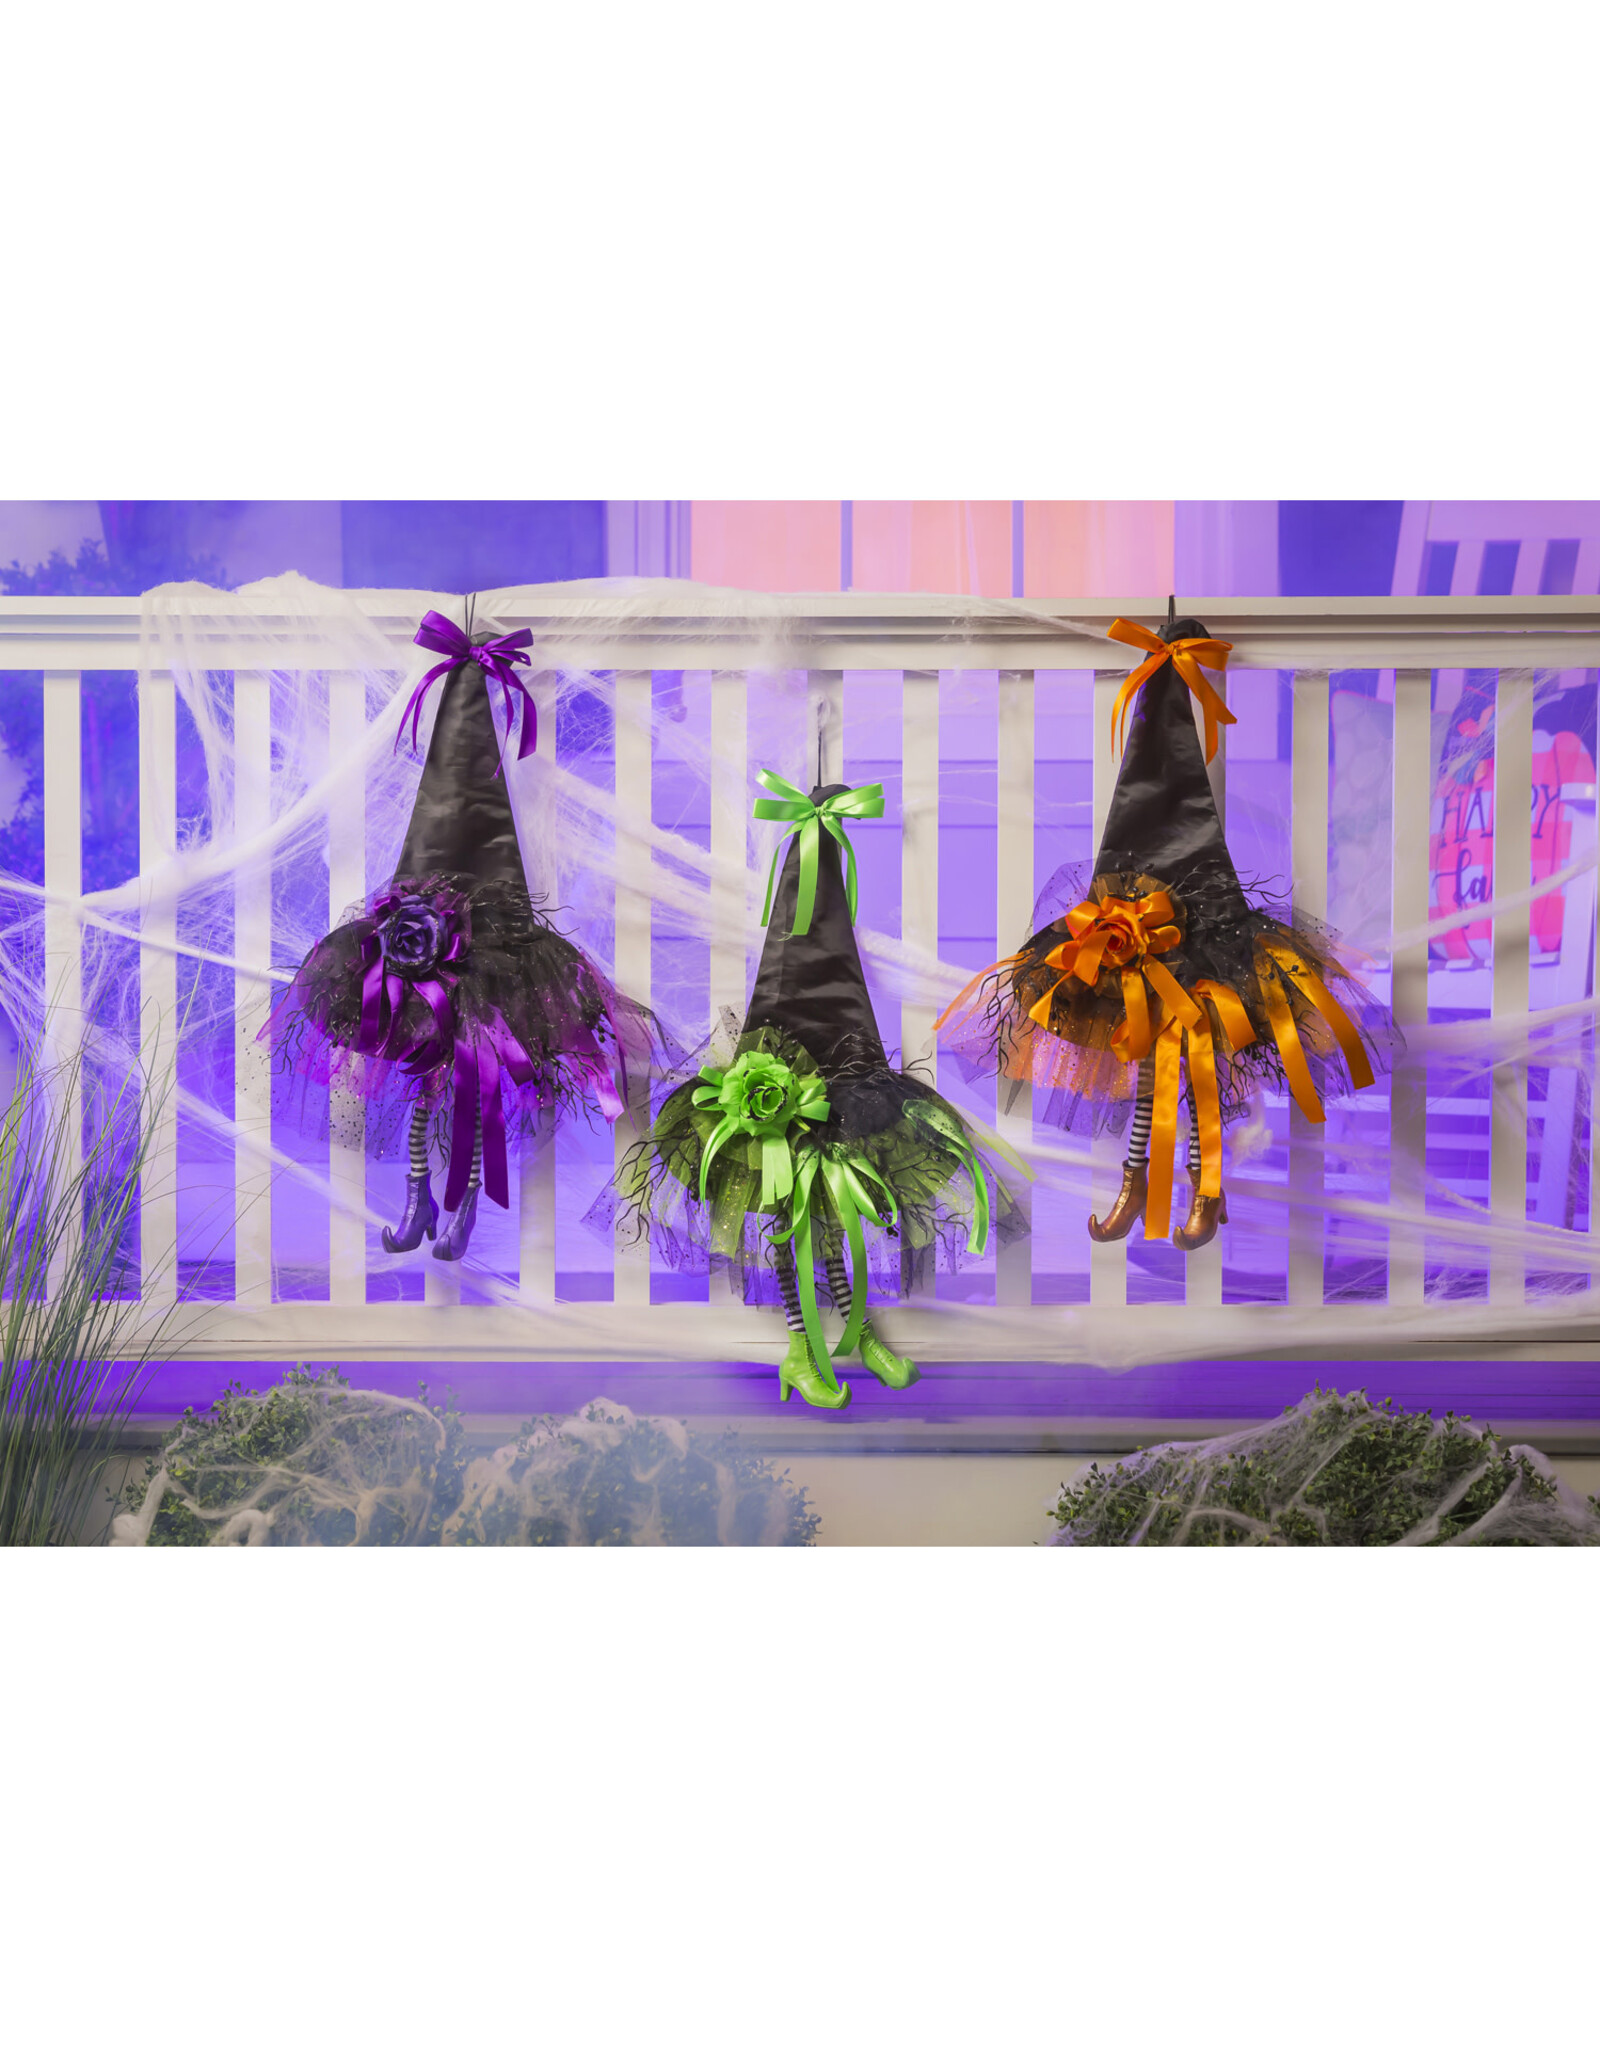 Evergreen Enterprises Witch Hat With Legs